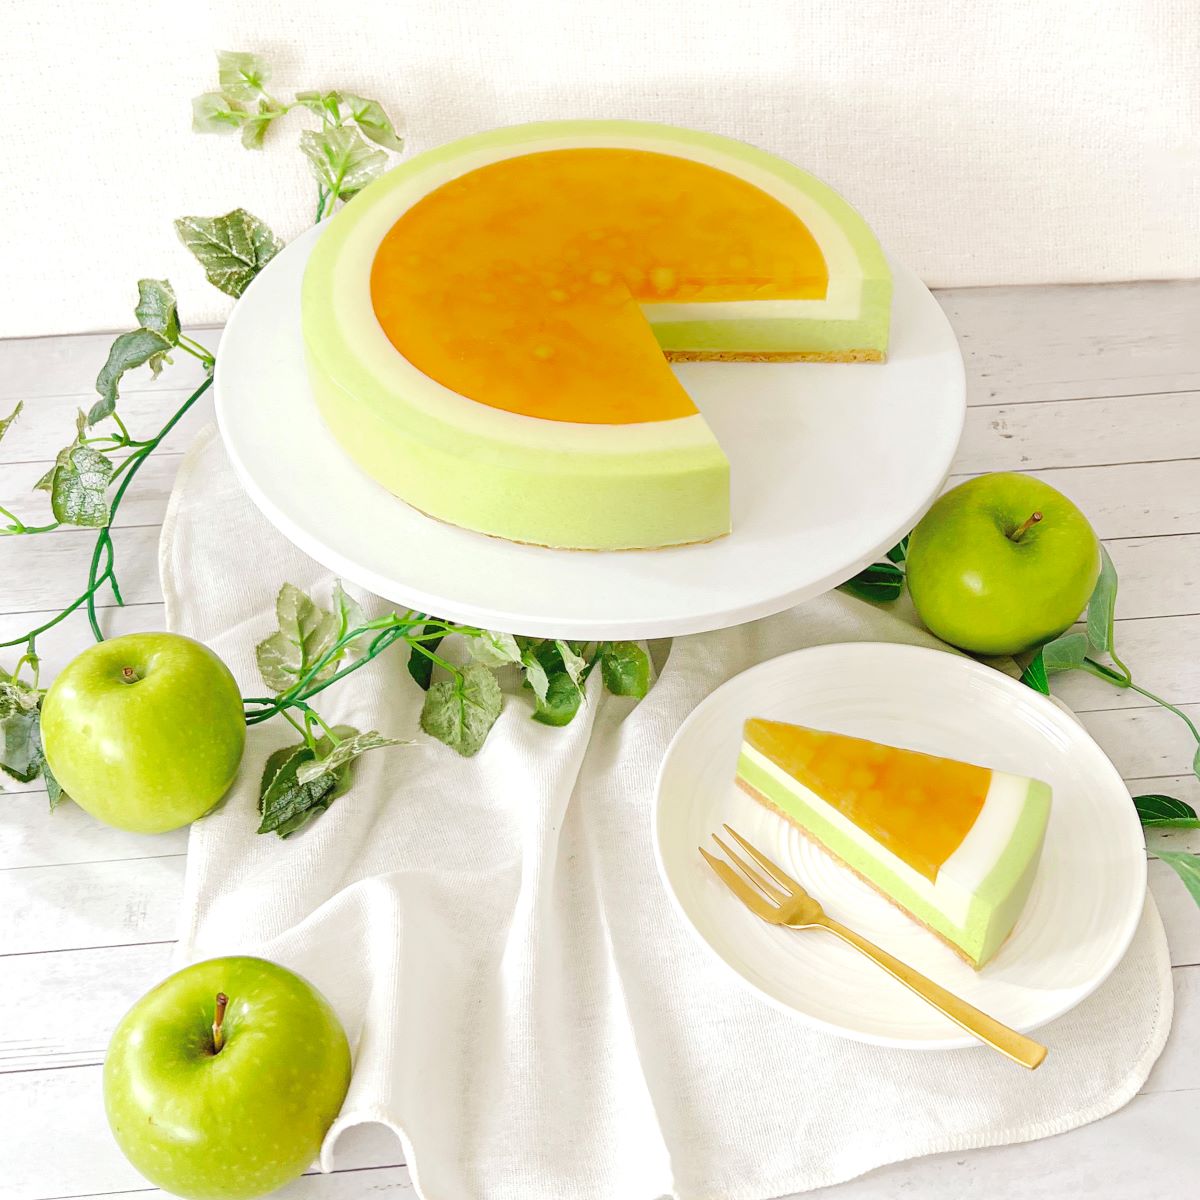 Lady M Celebrates Sensational Summertime with New Green Apple Mousse Cake